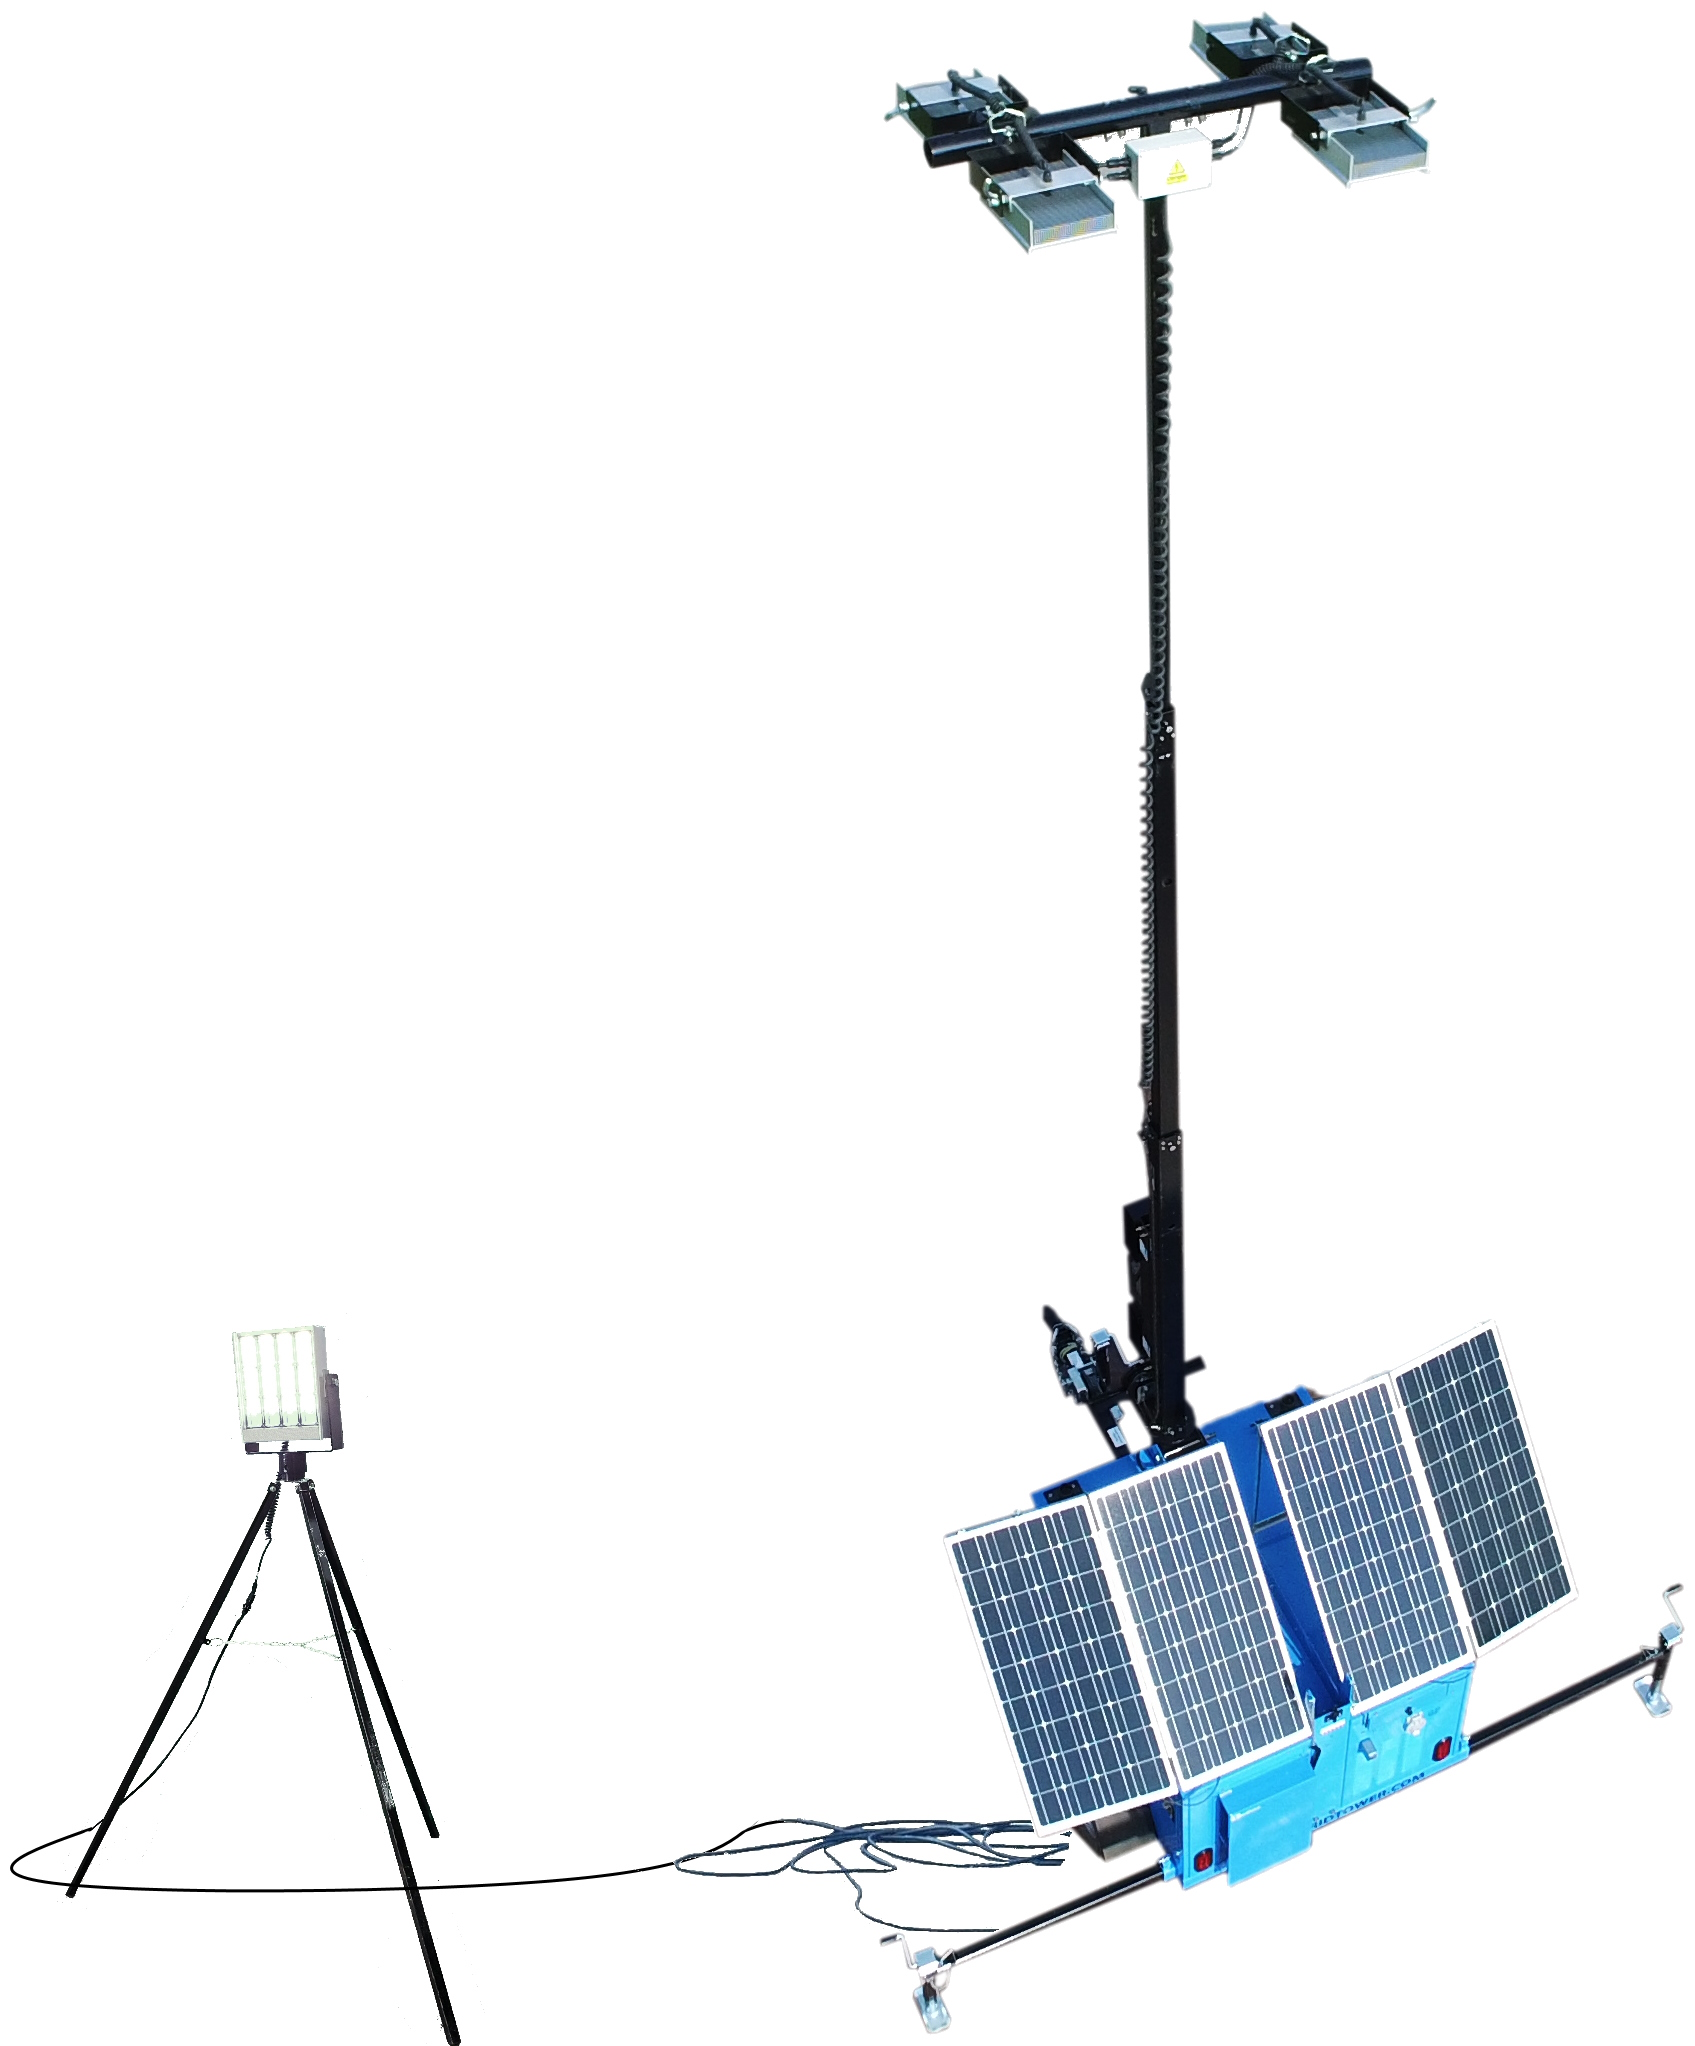 hybrid light tower with remote led lights